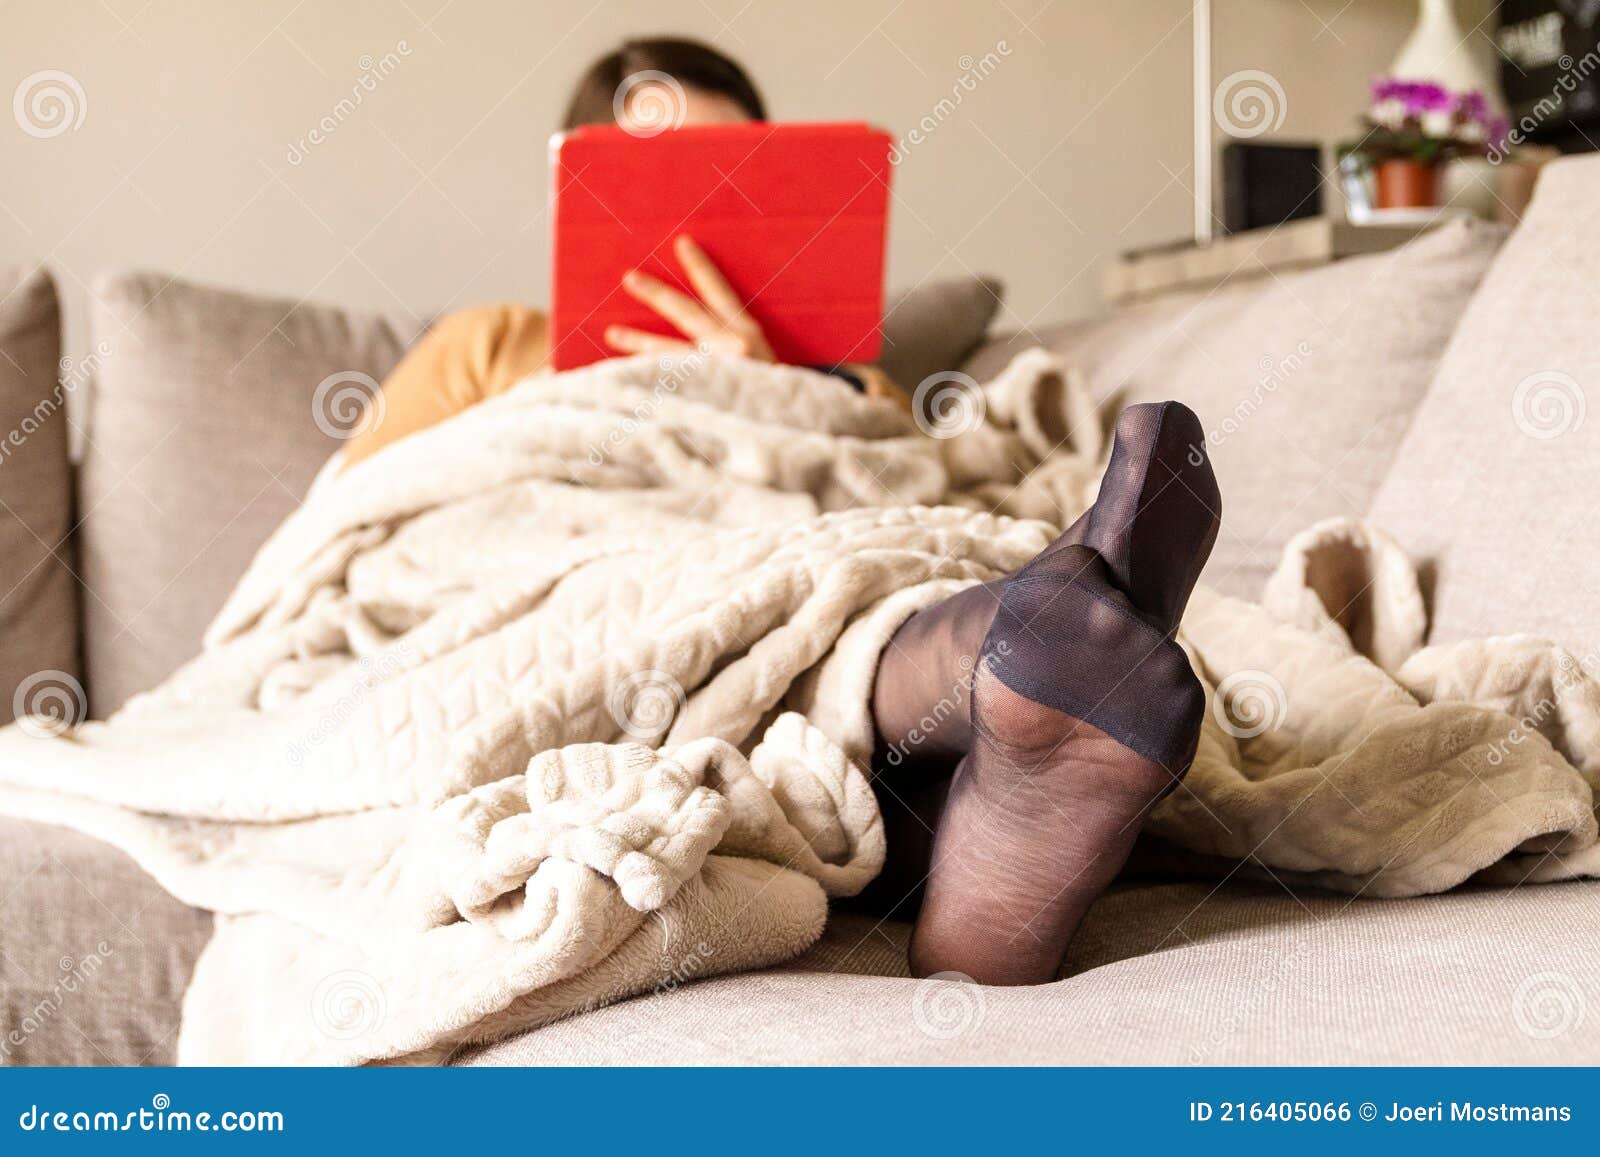 A Portrait of Female Legs Covered in Black Nylon Stockings or Pantyhose  while Wearing Slippers or Mules on the Feet Standing Stock Image - Image of  fatigued, feet: 249205171